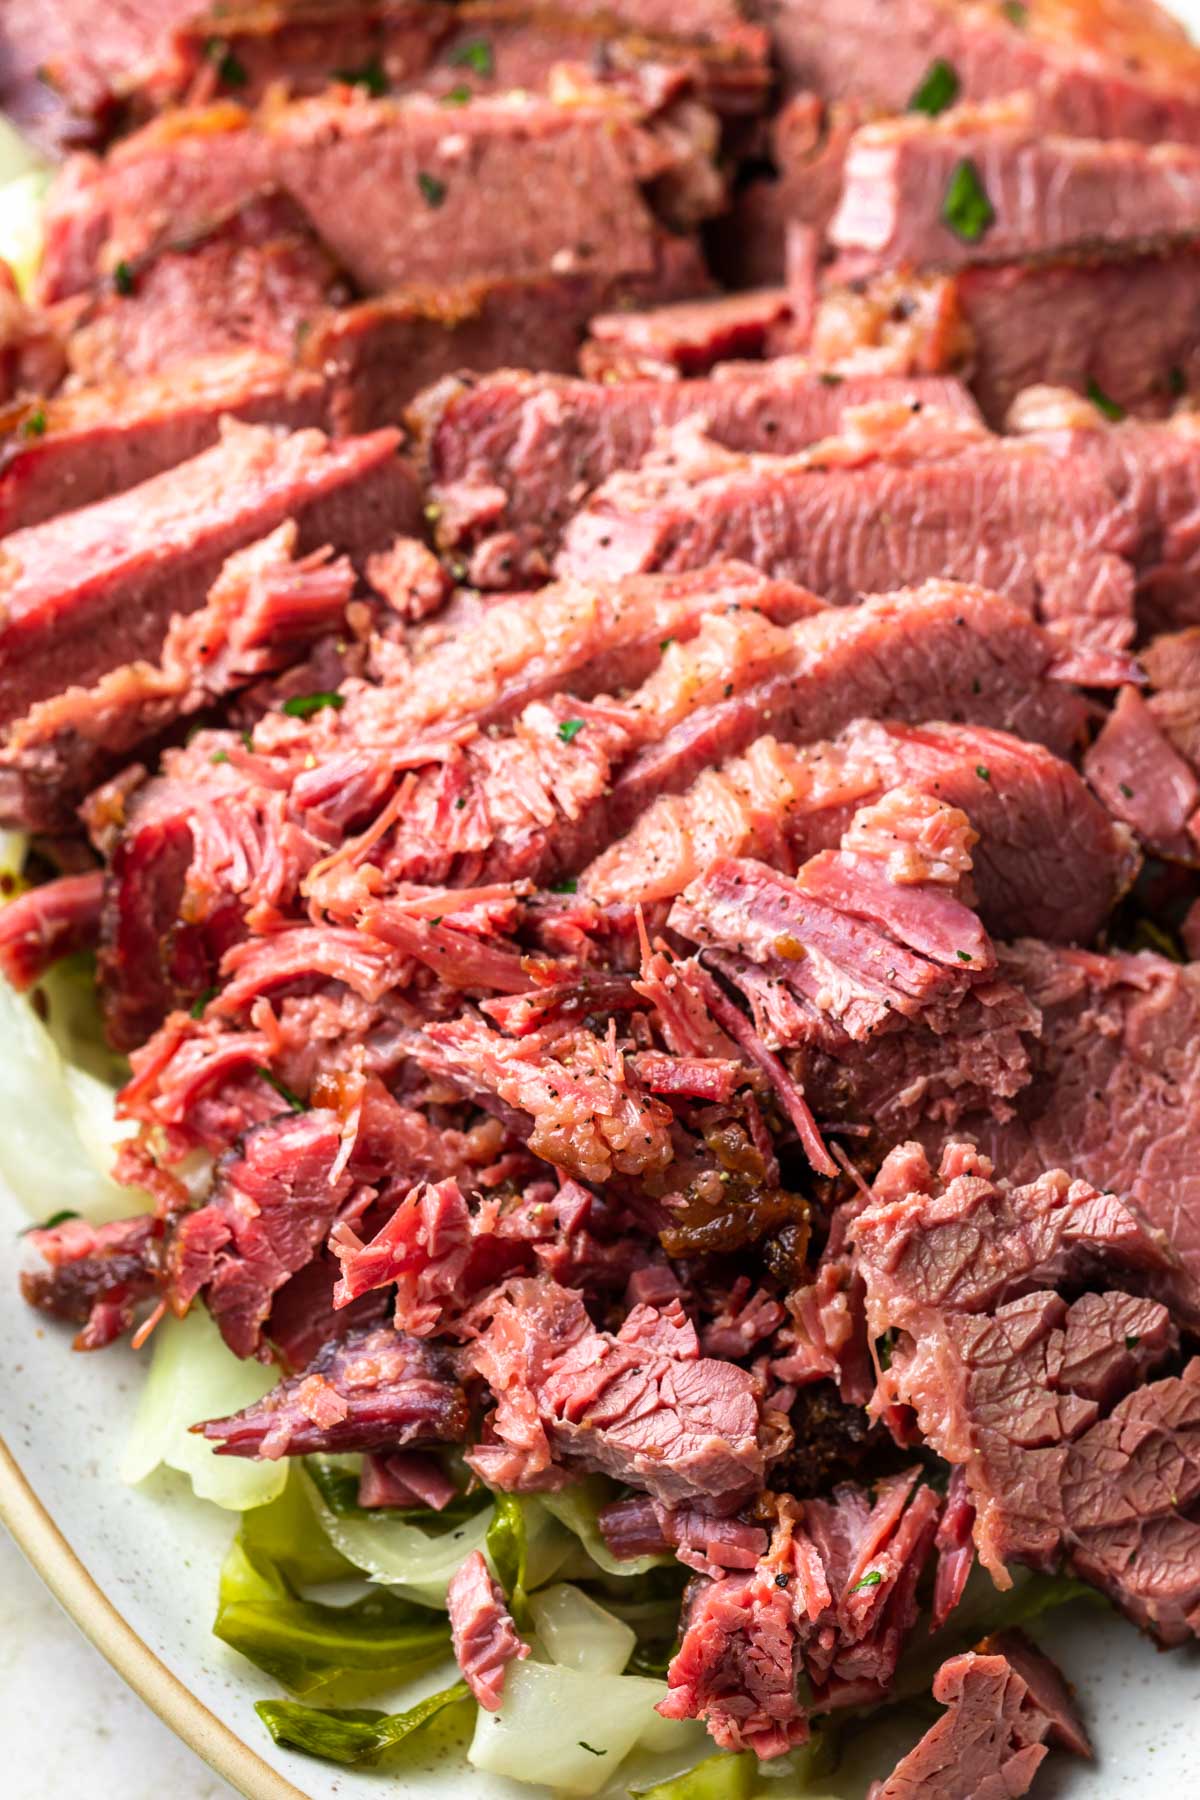 sliced and shredded corned beef on a platter